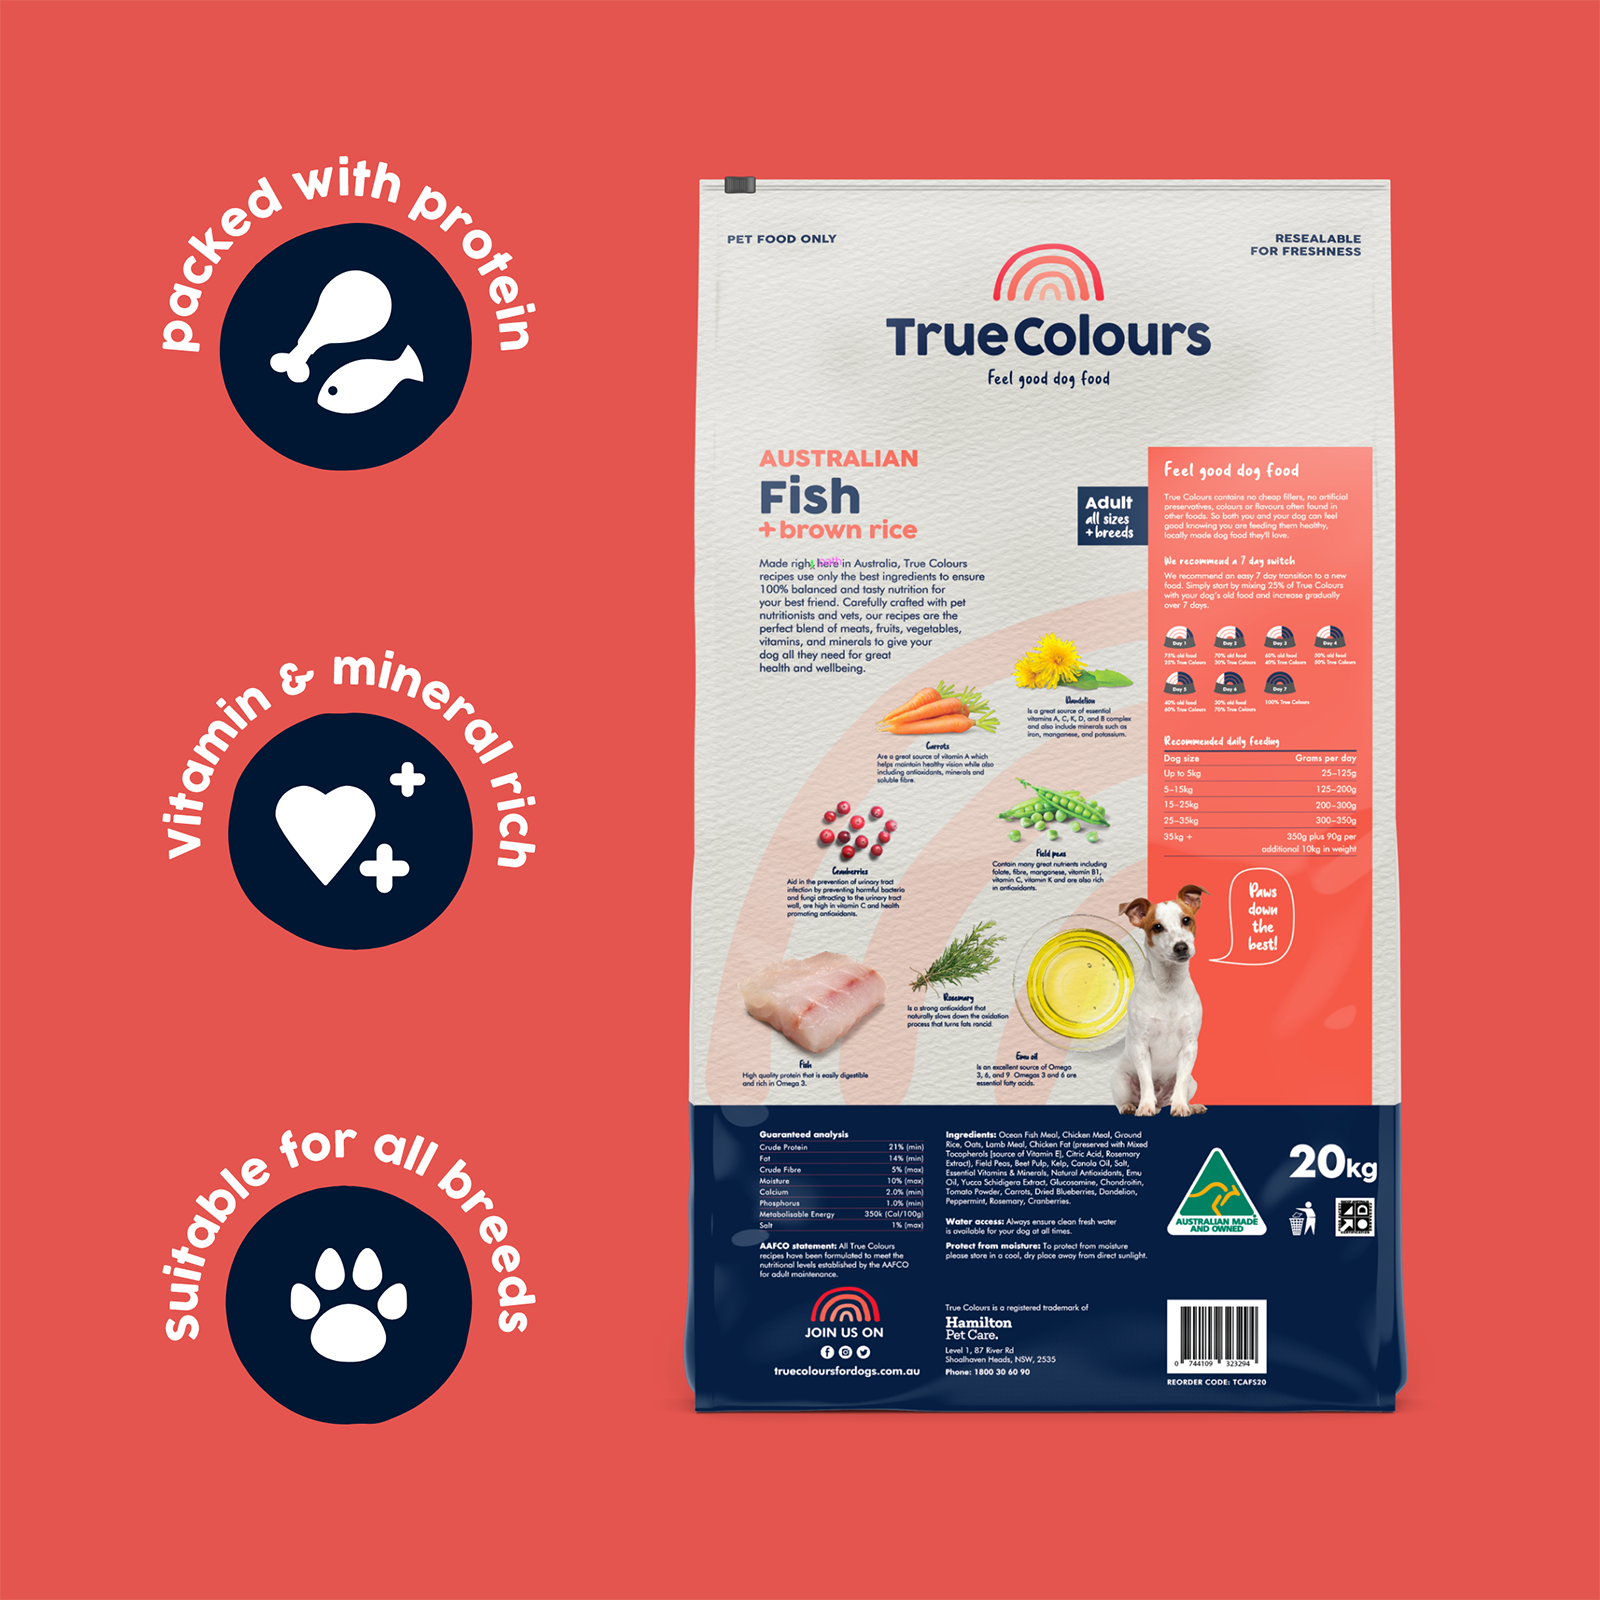 True Colours Dog Food Adult Fish & Rice